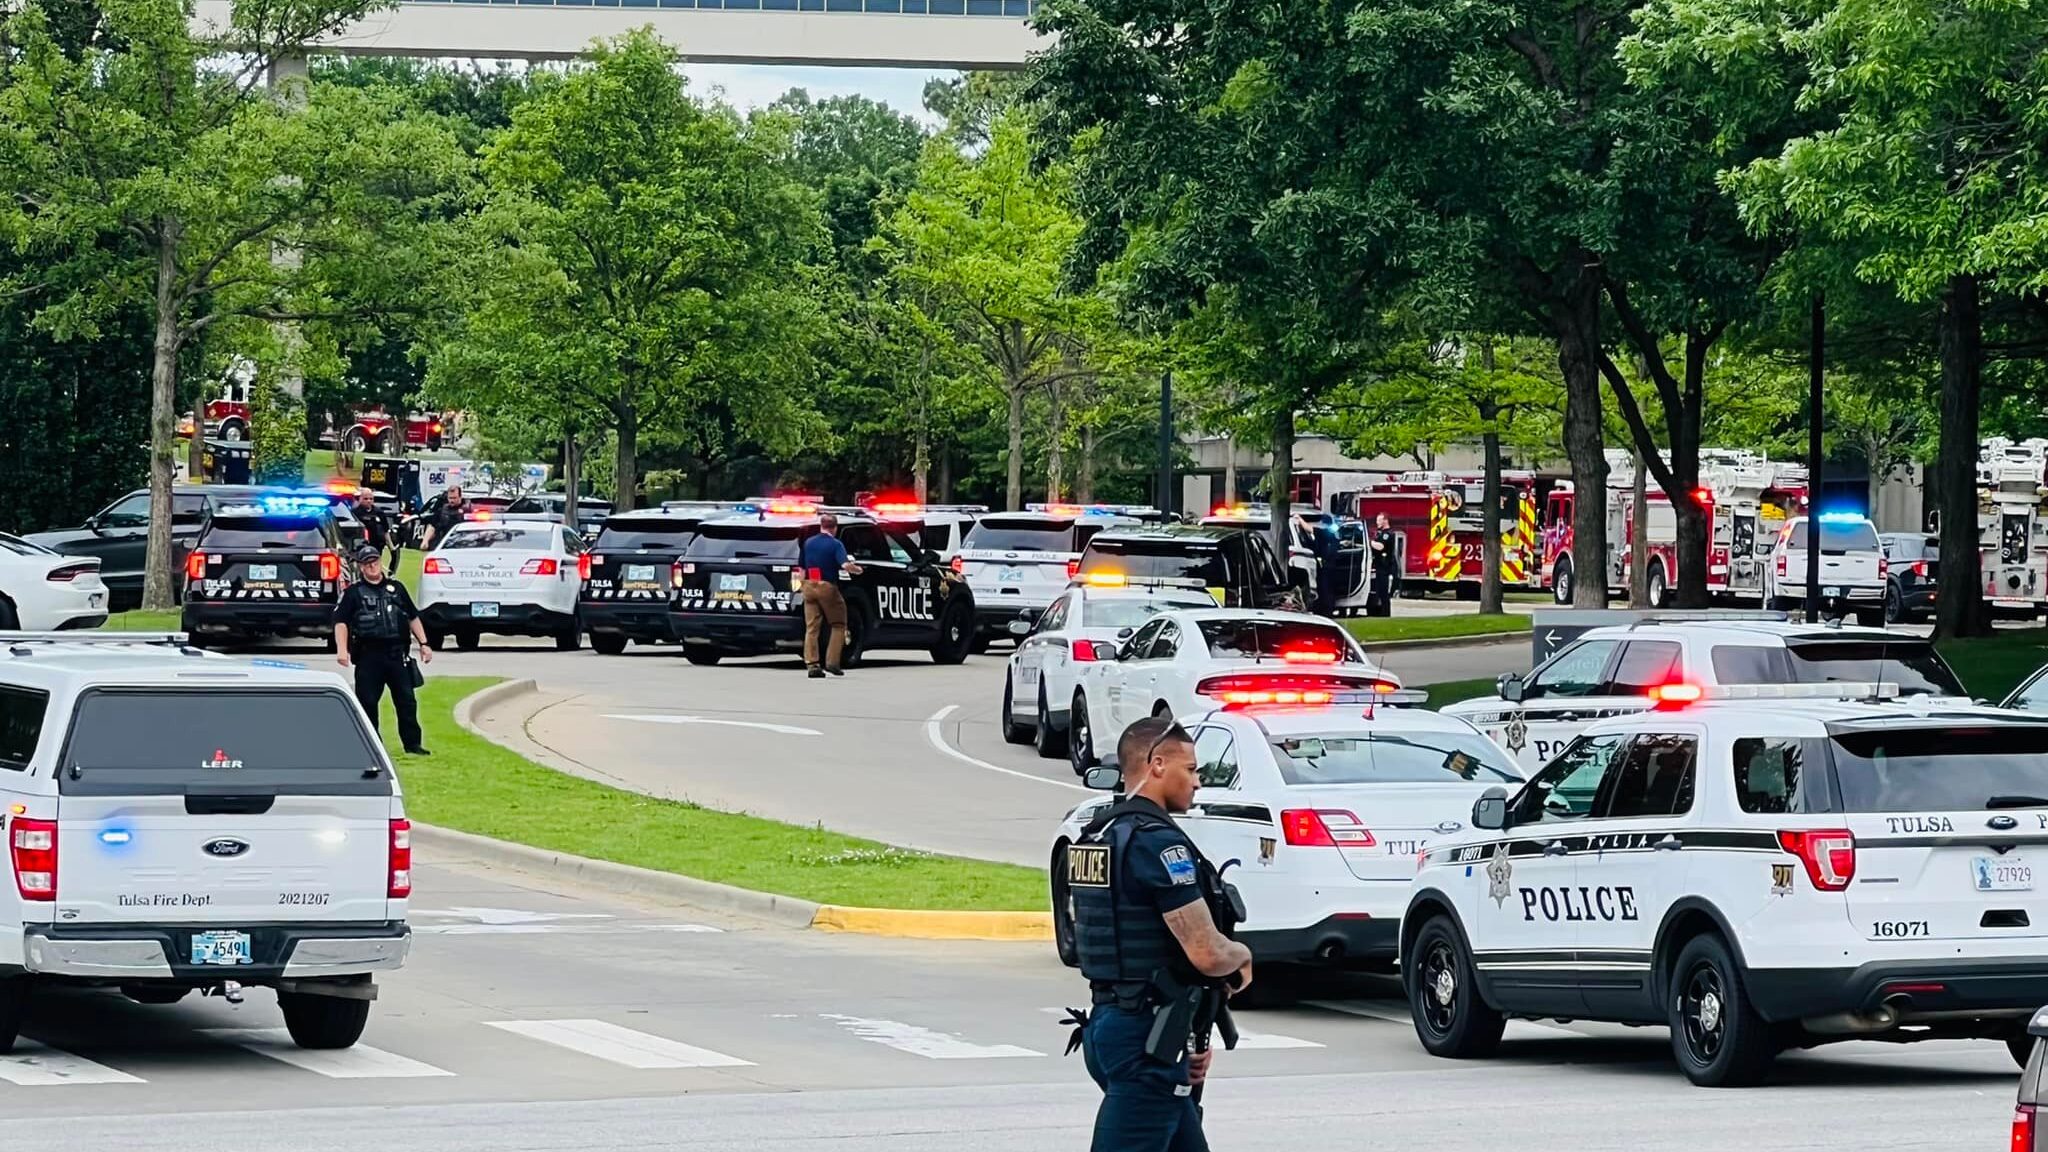 The Tulsa Police Department responded to an active shooter situation in what appeared to be a mass shooting.